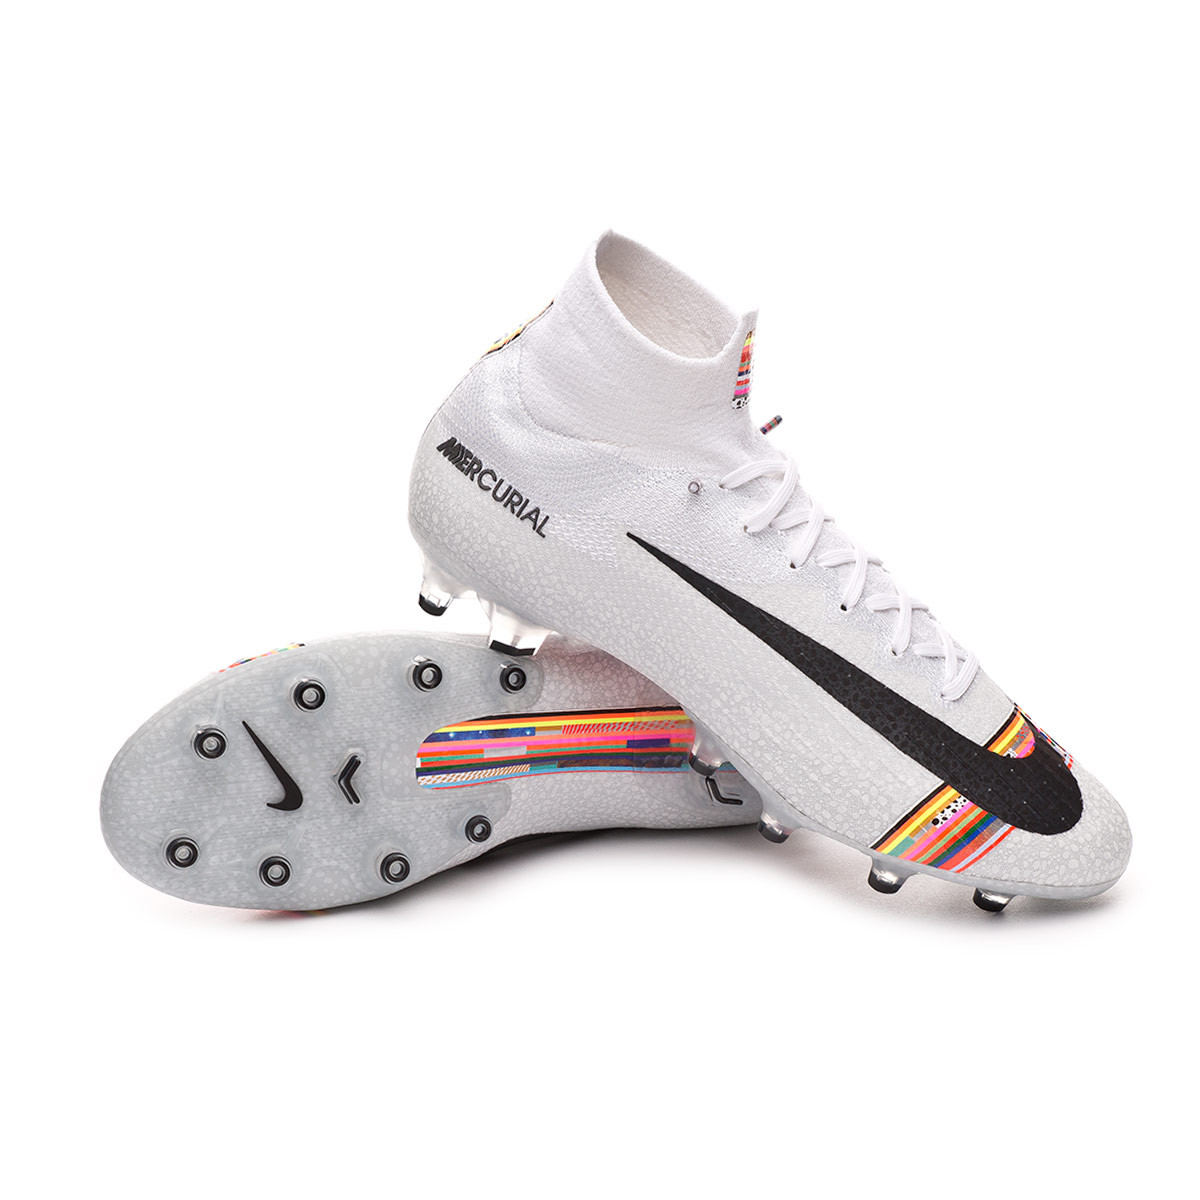 Football Boots Nike Mercurial Superfly 